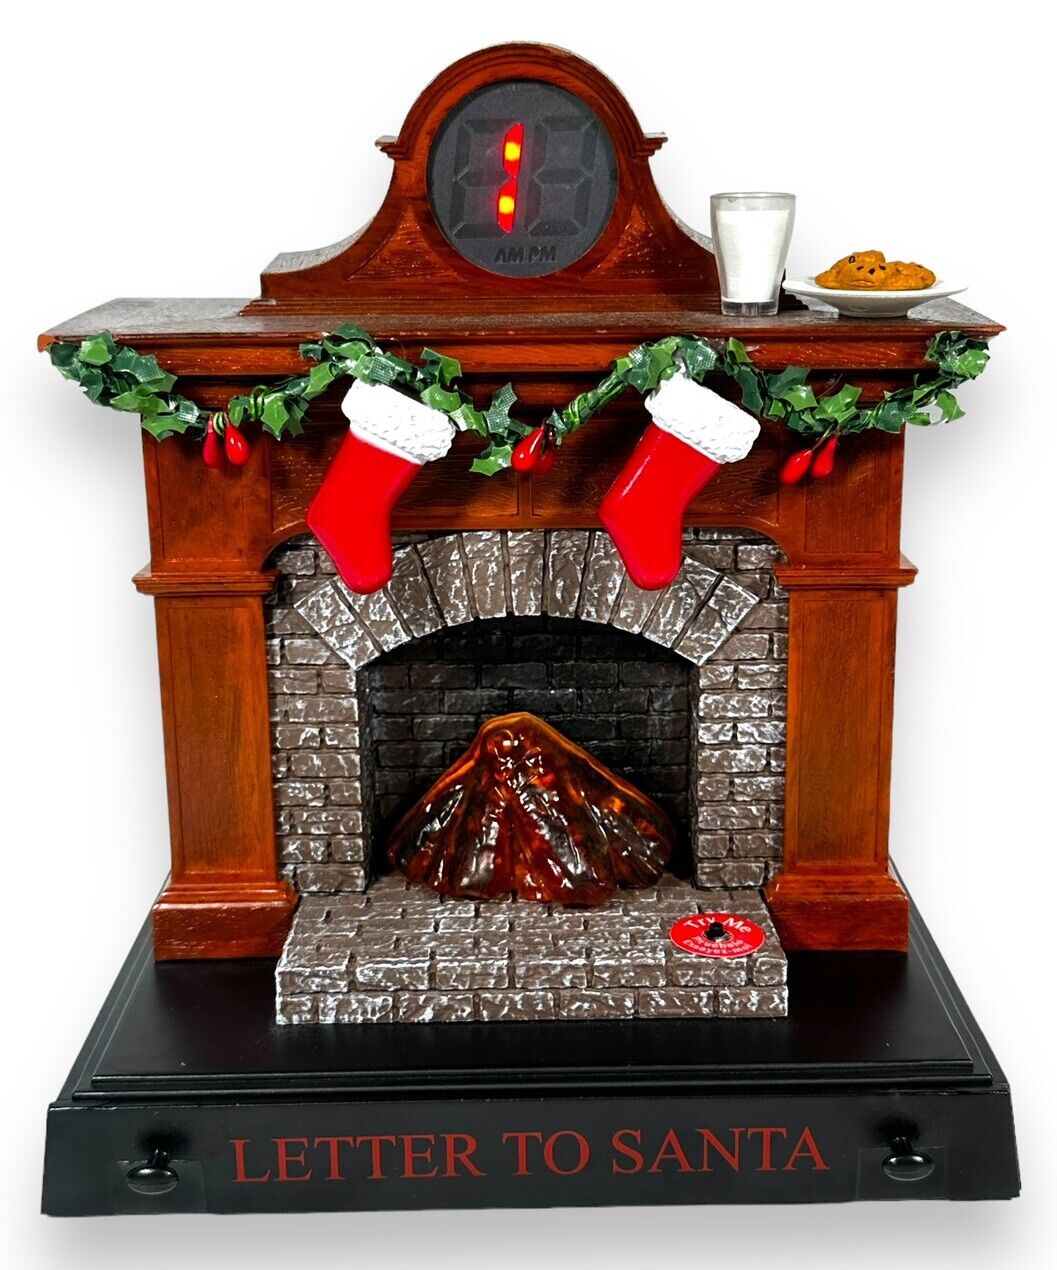 St Nick's Choice Letter To Santa Fireplace Countdown Clock Talks Music SEE VIDEO